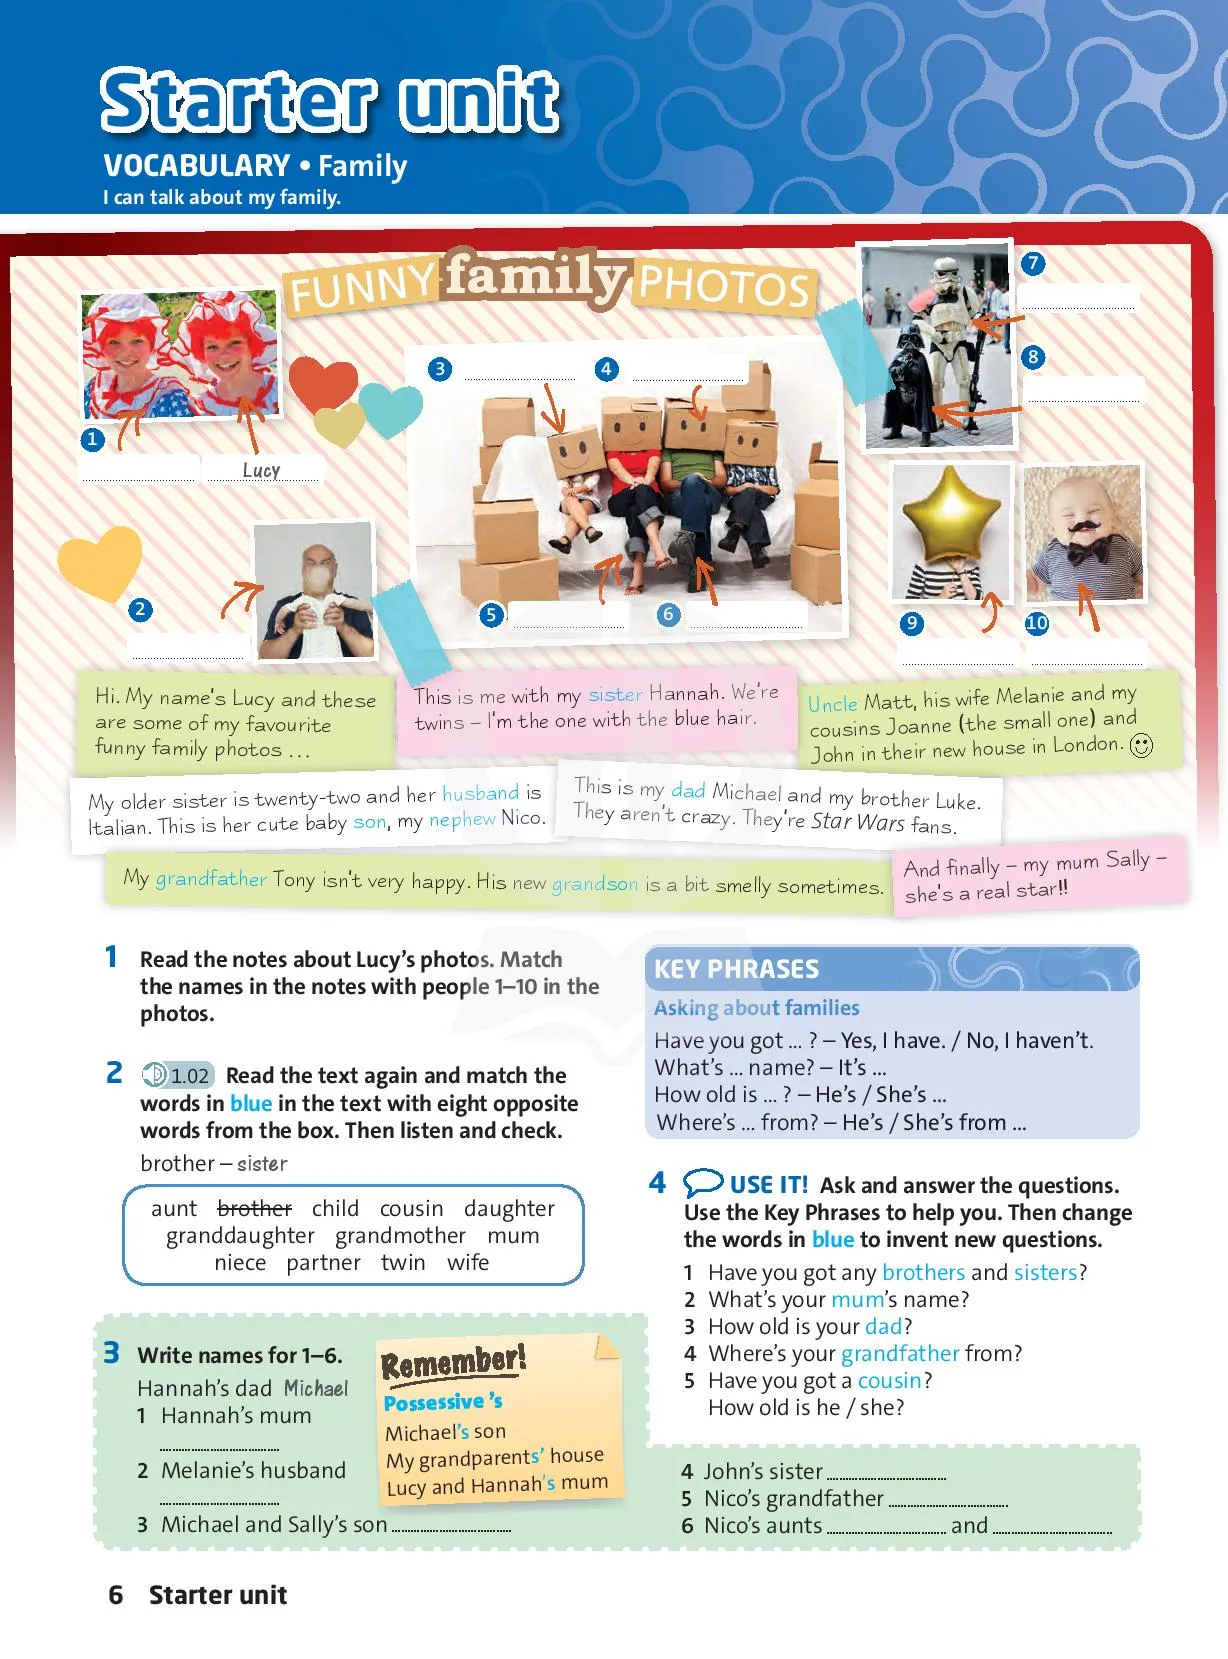 Family brother, father, husband, etc. Key phrases: Asking about families